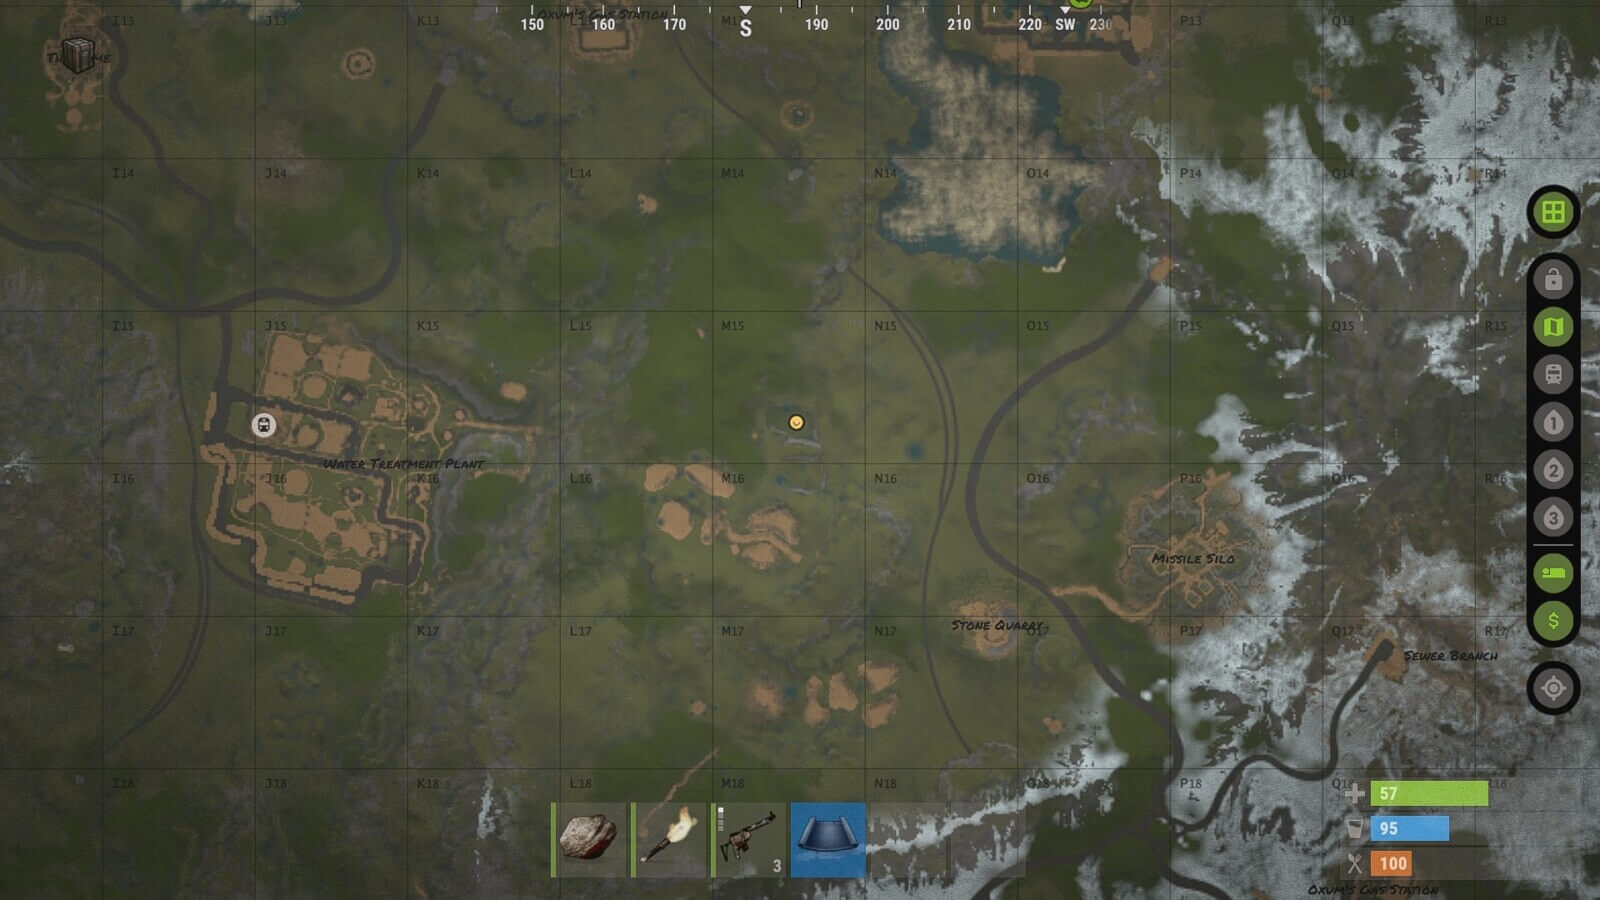 The in-game map overview location image for Rust indicating the custom swamps location on the observer island map